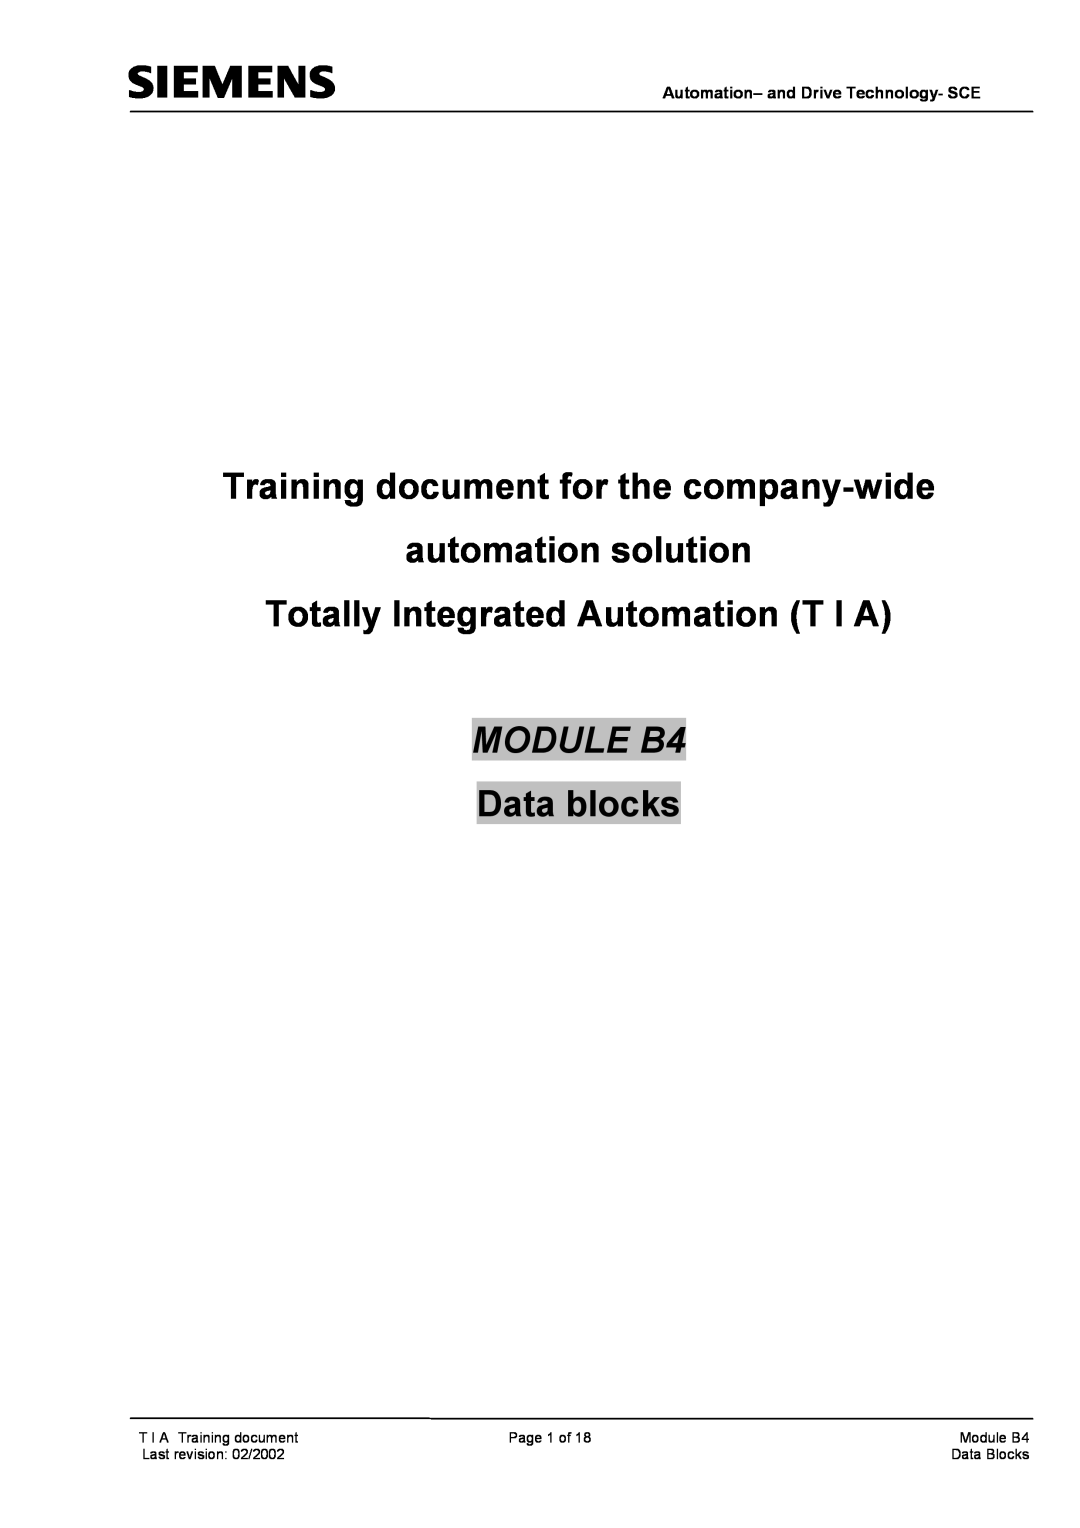 Siemens B4 manual Training document for the company-wide automation solution, Totally Integrated Automation T I A 